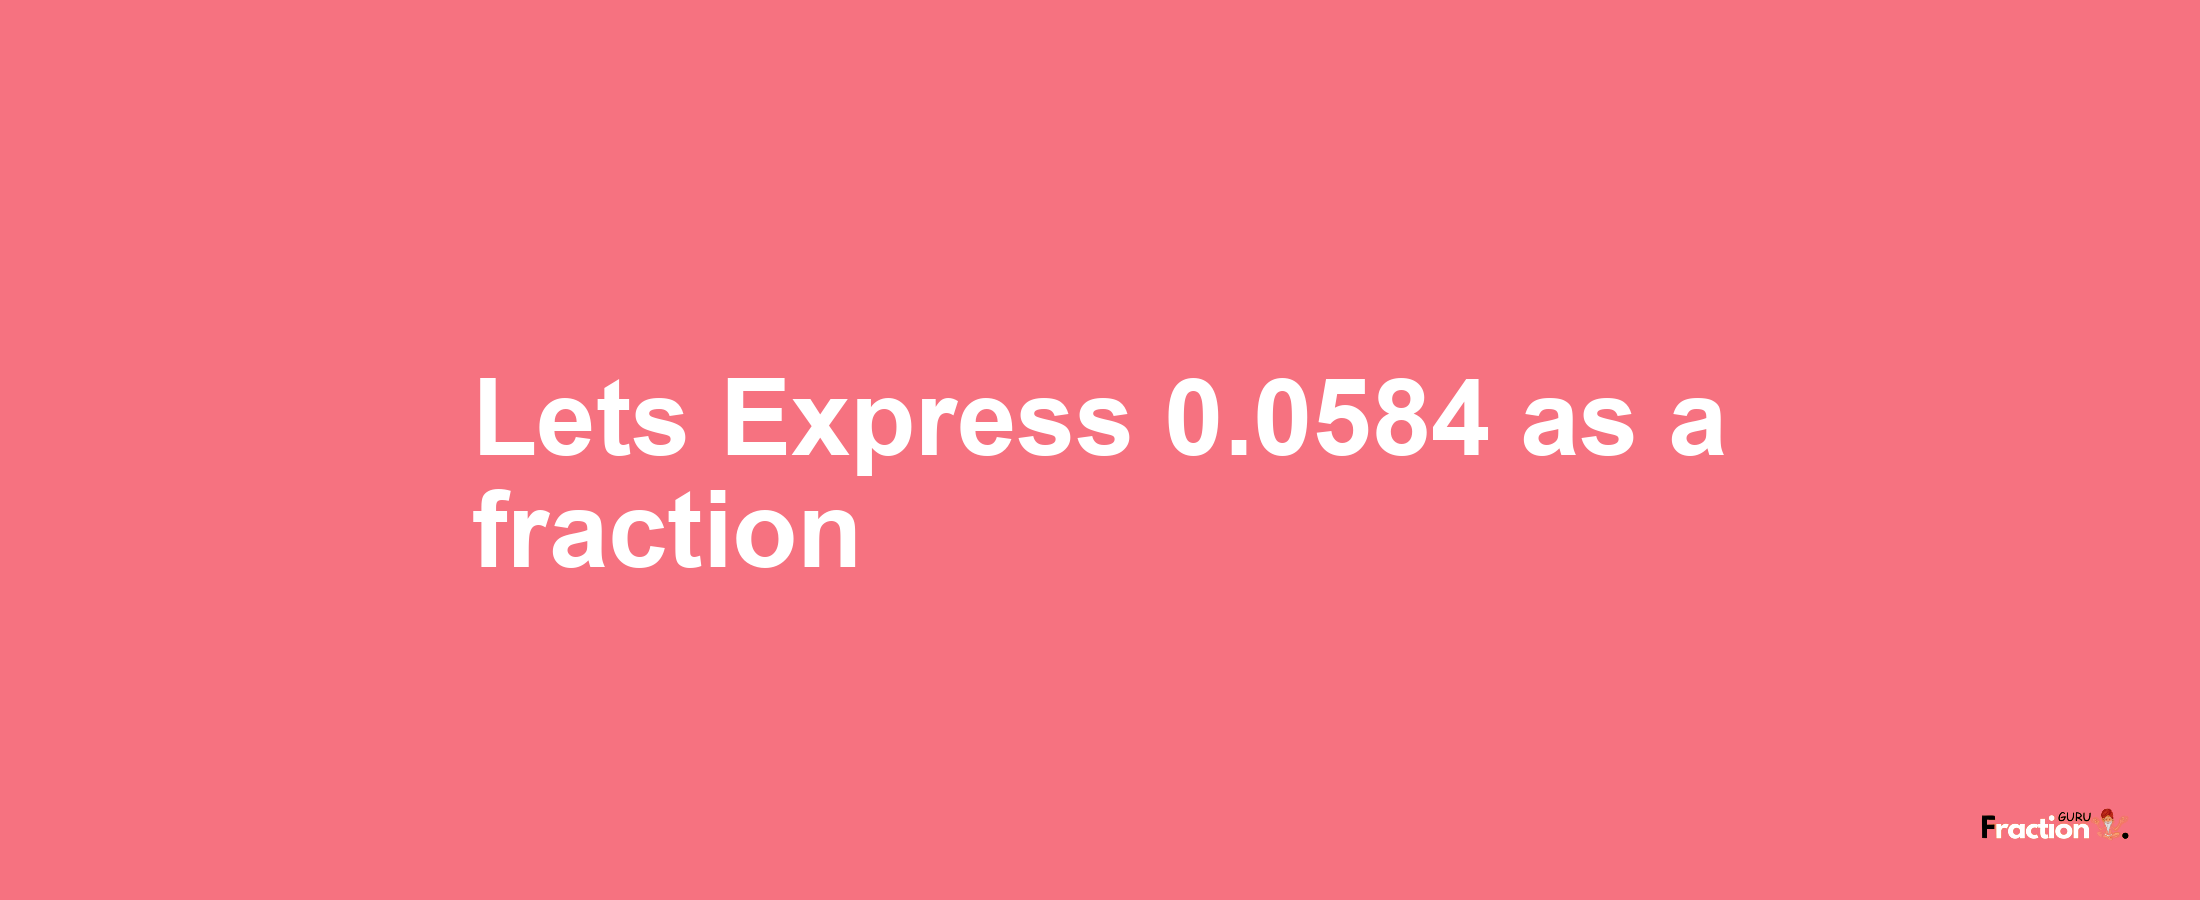 Lets Express 0.0584 as afraction